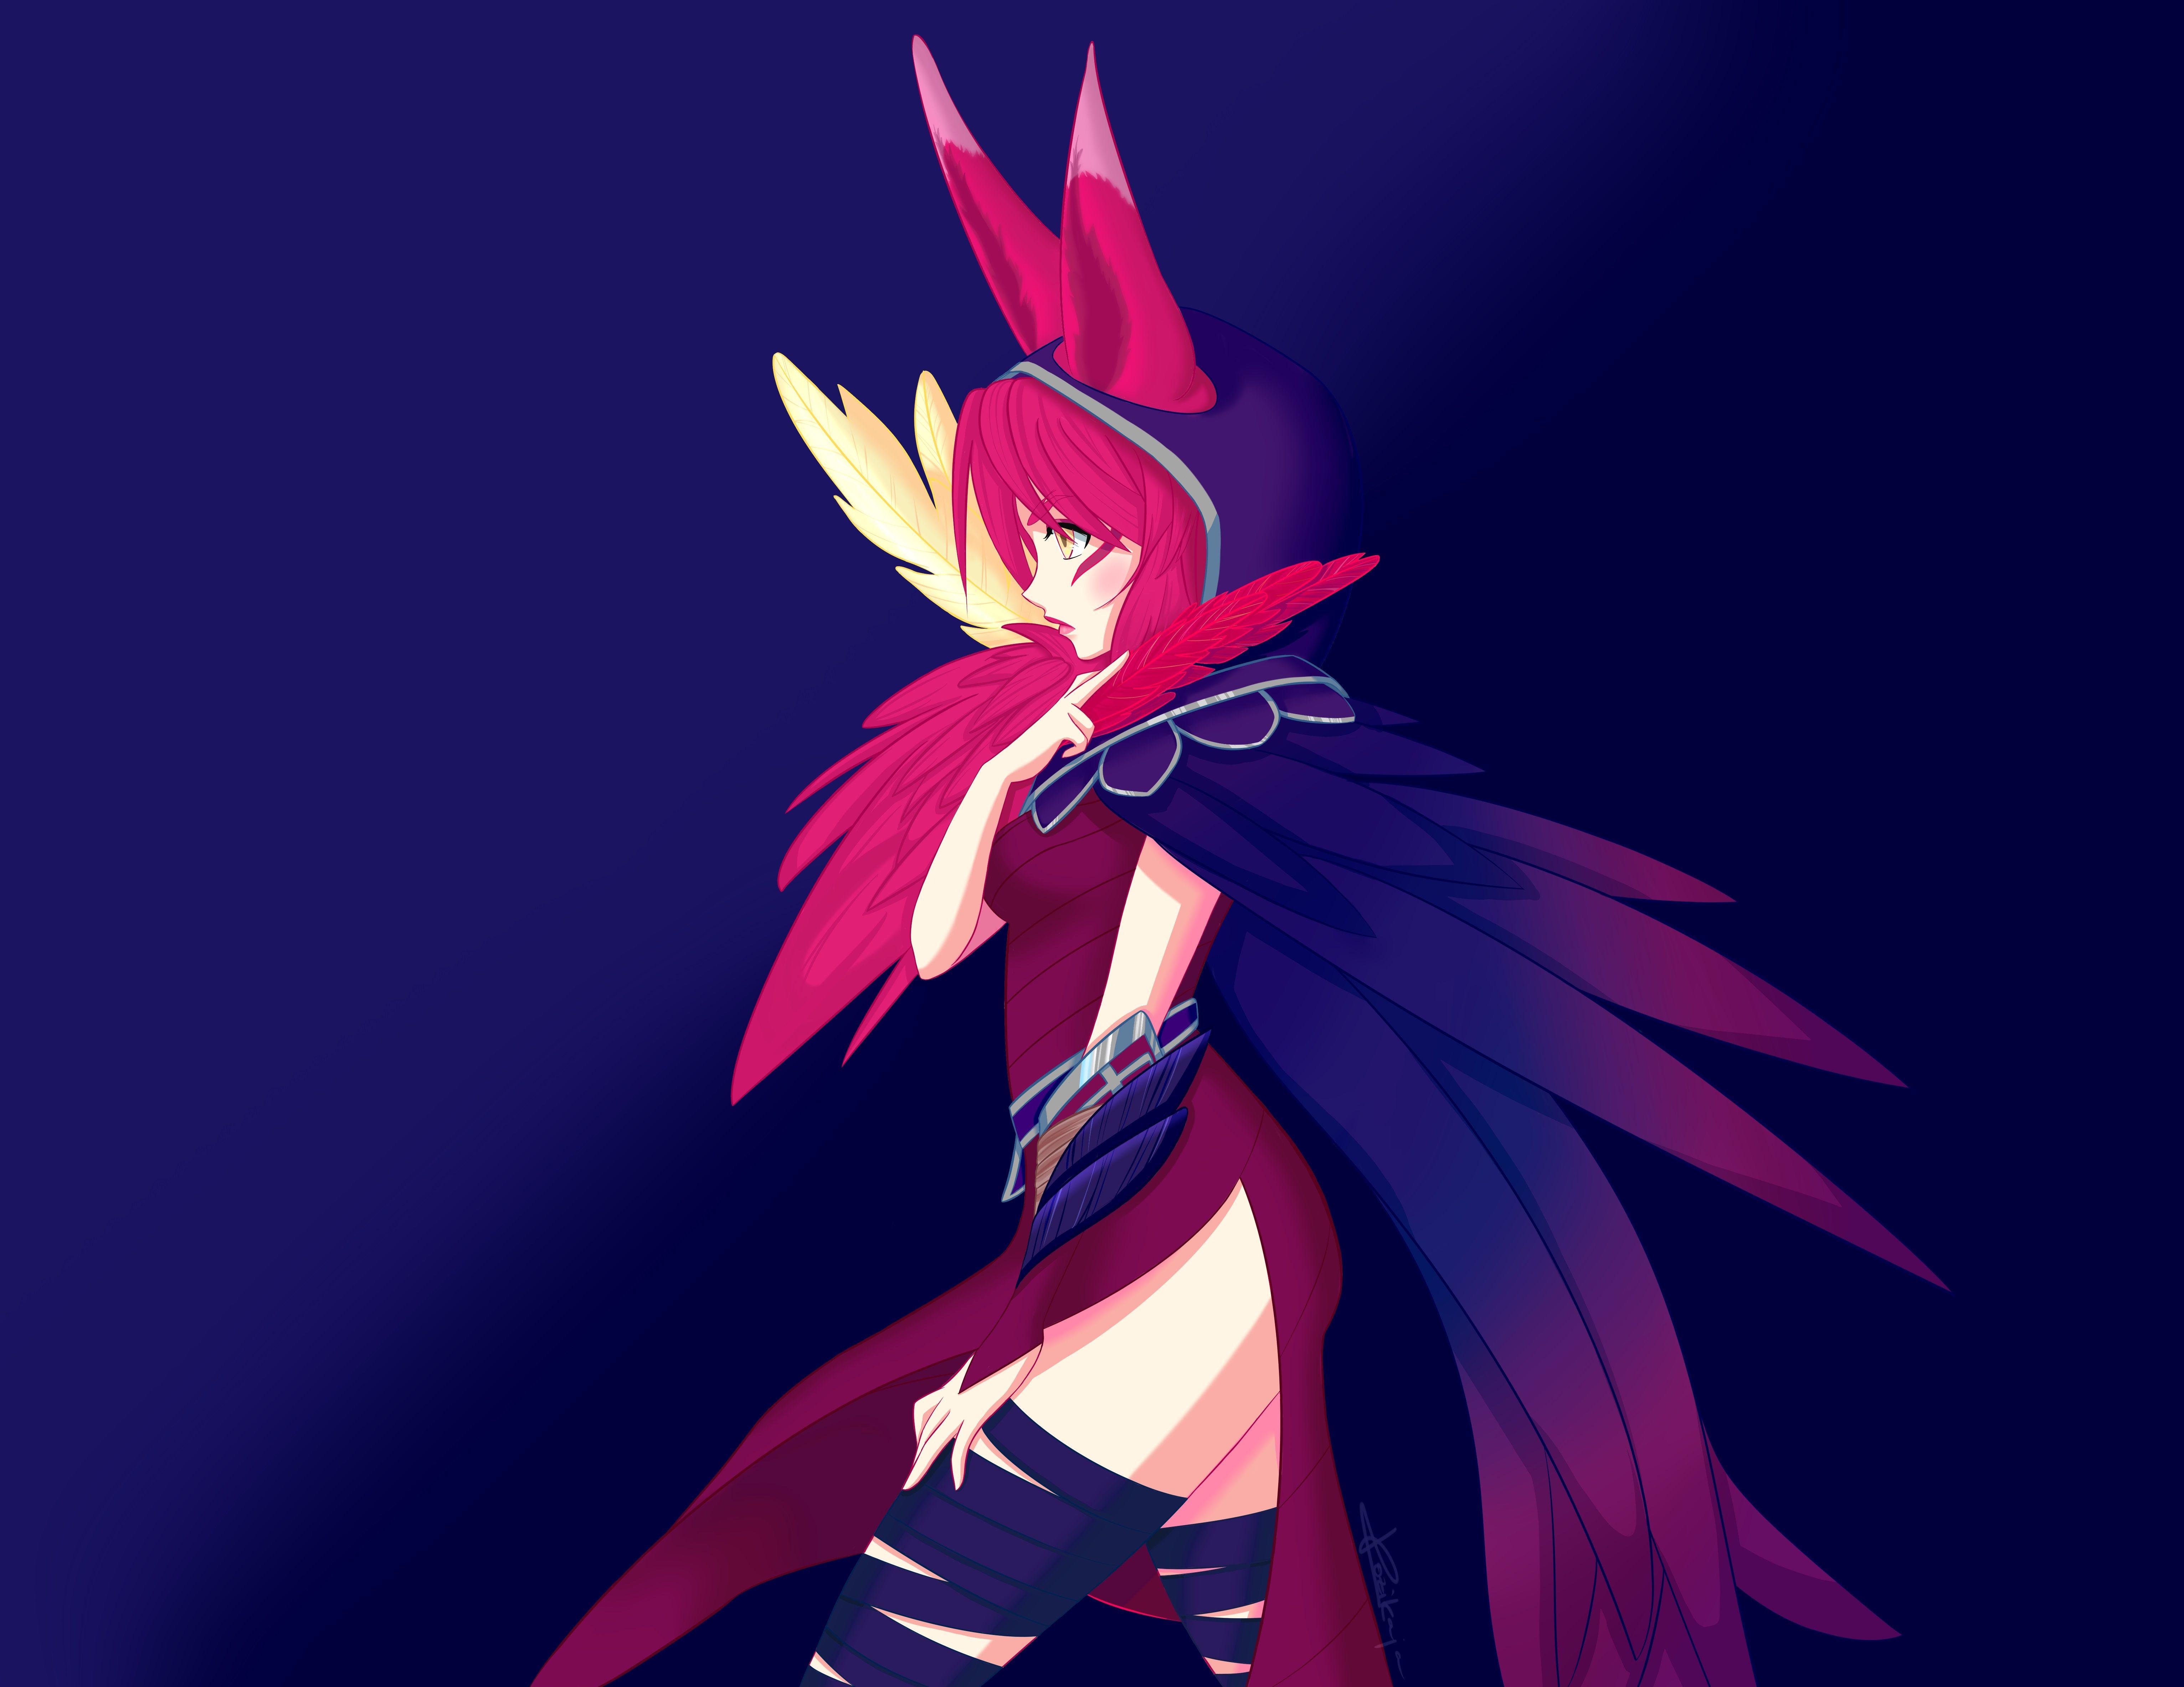 Xayah fanart ♥ Who does not love League of Legends and Xayah is